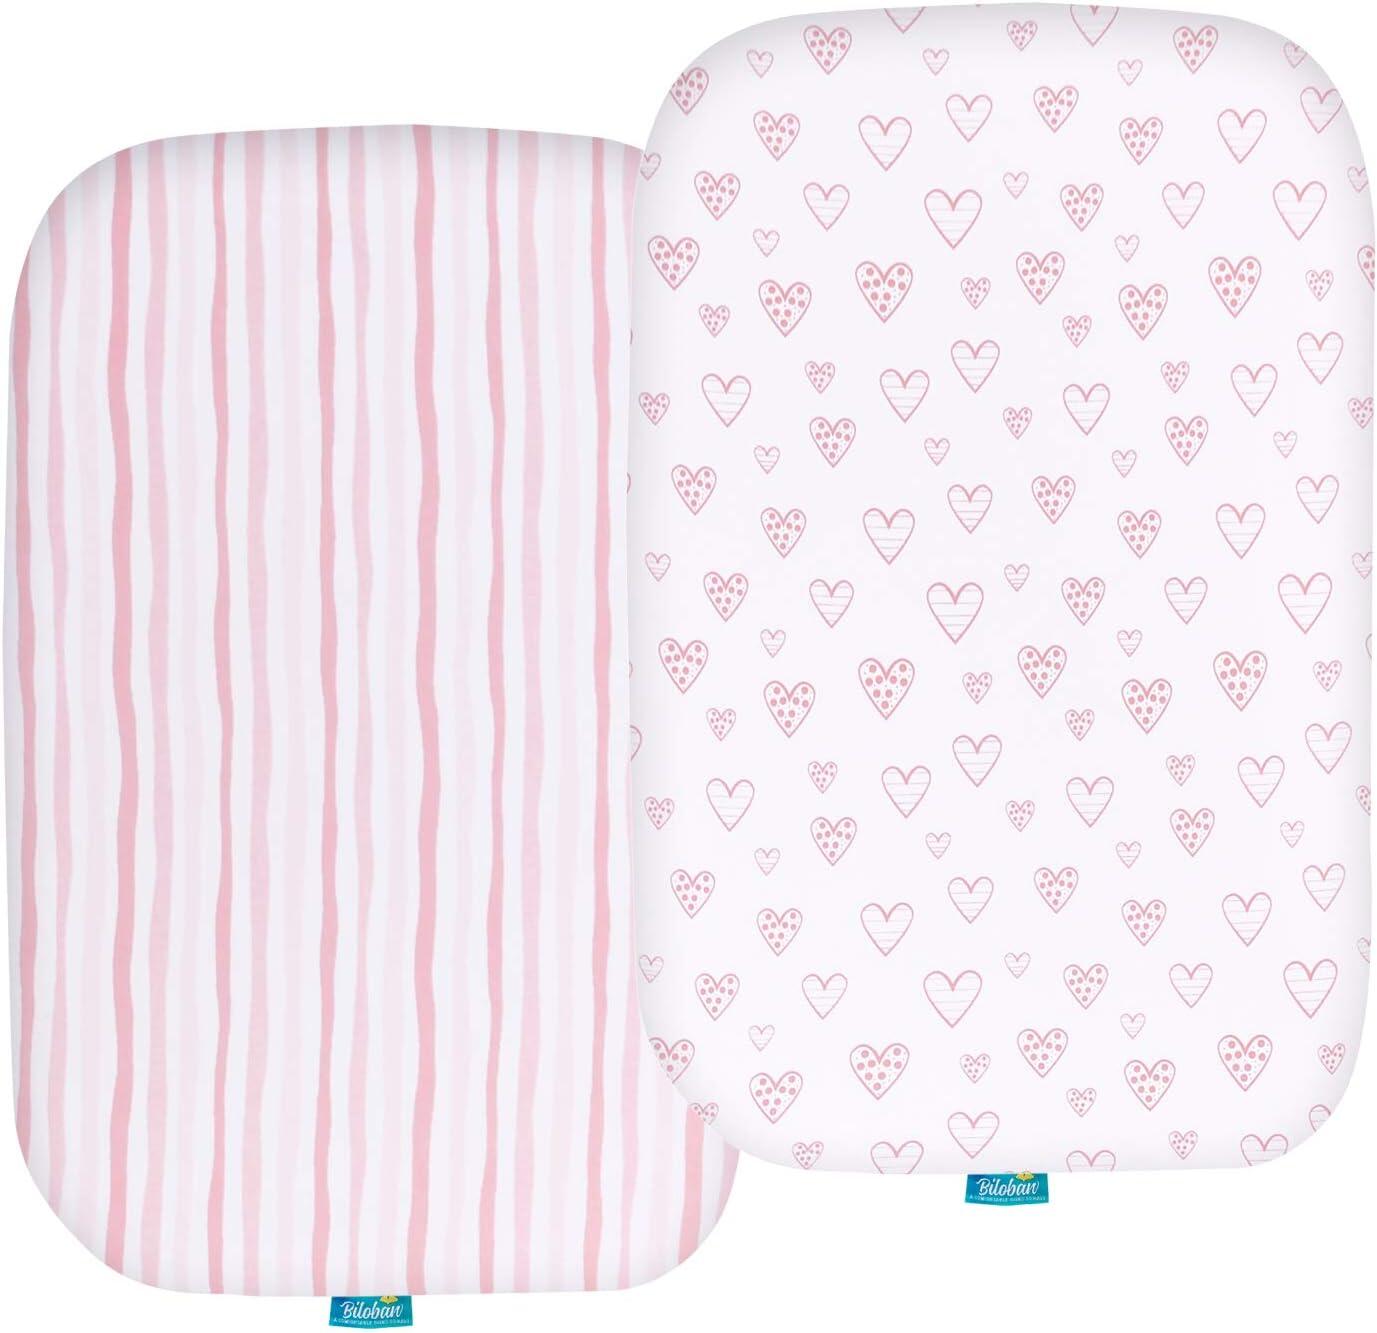 Bassinet Sheets - Fit Graco Pack 'n Play Close2Baby Bassinet, 2 Pack, 100% Jersey Cotton, Pink & White - Biloban Online Store